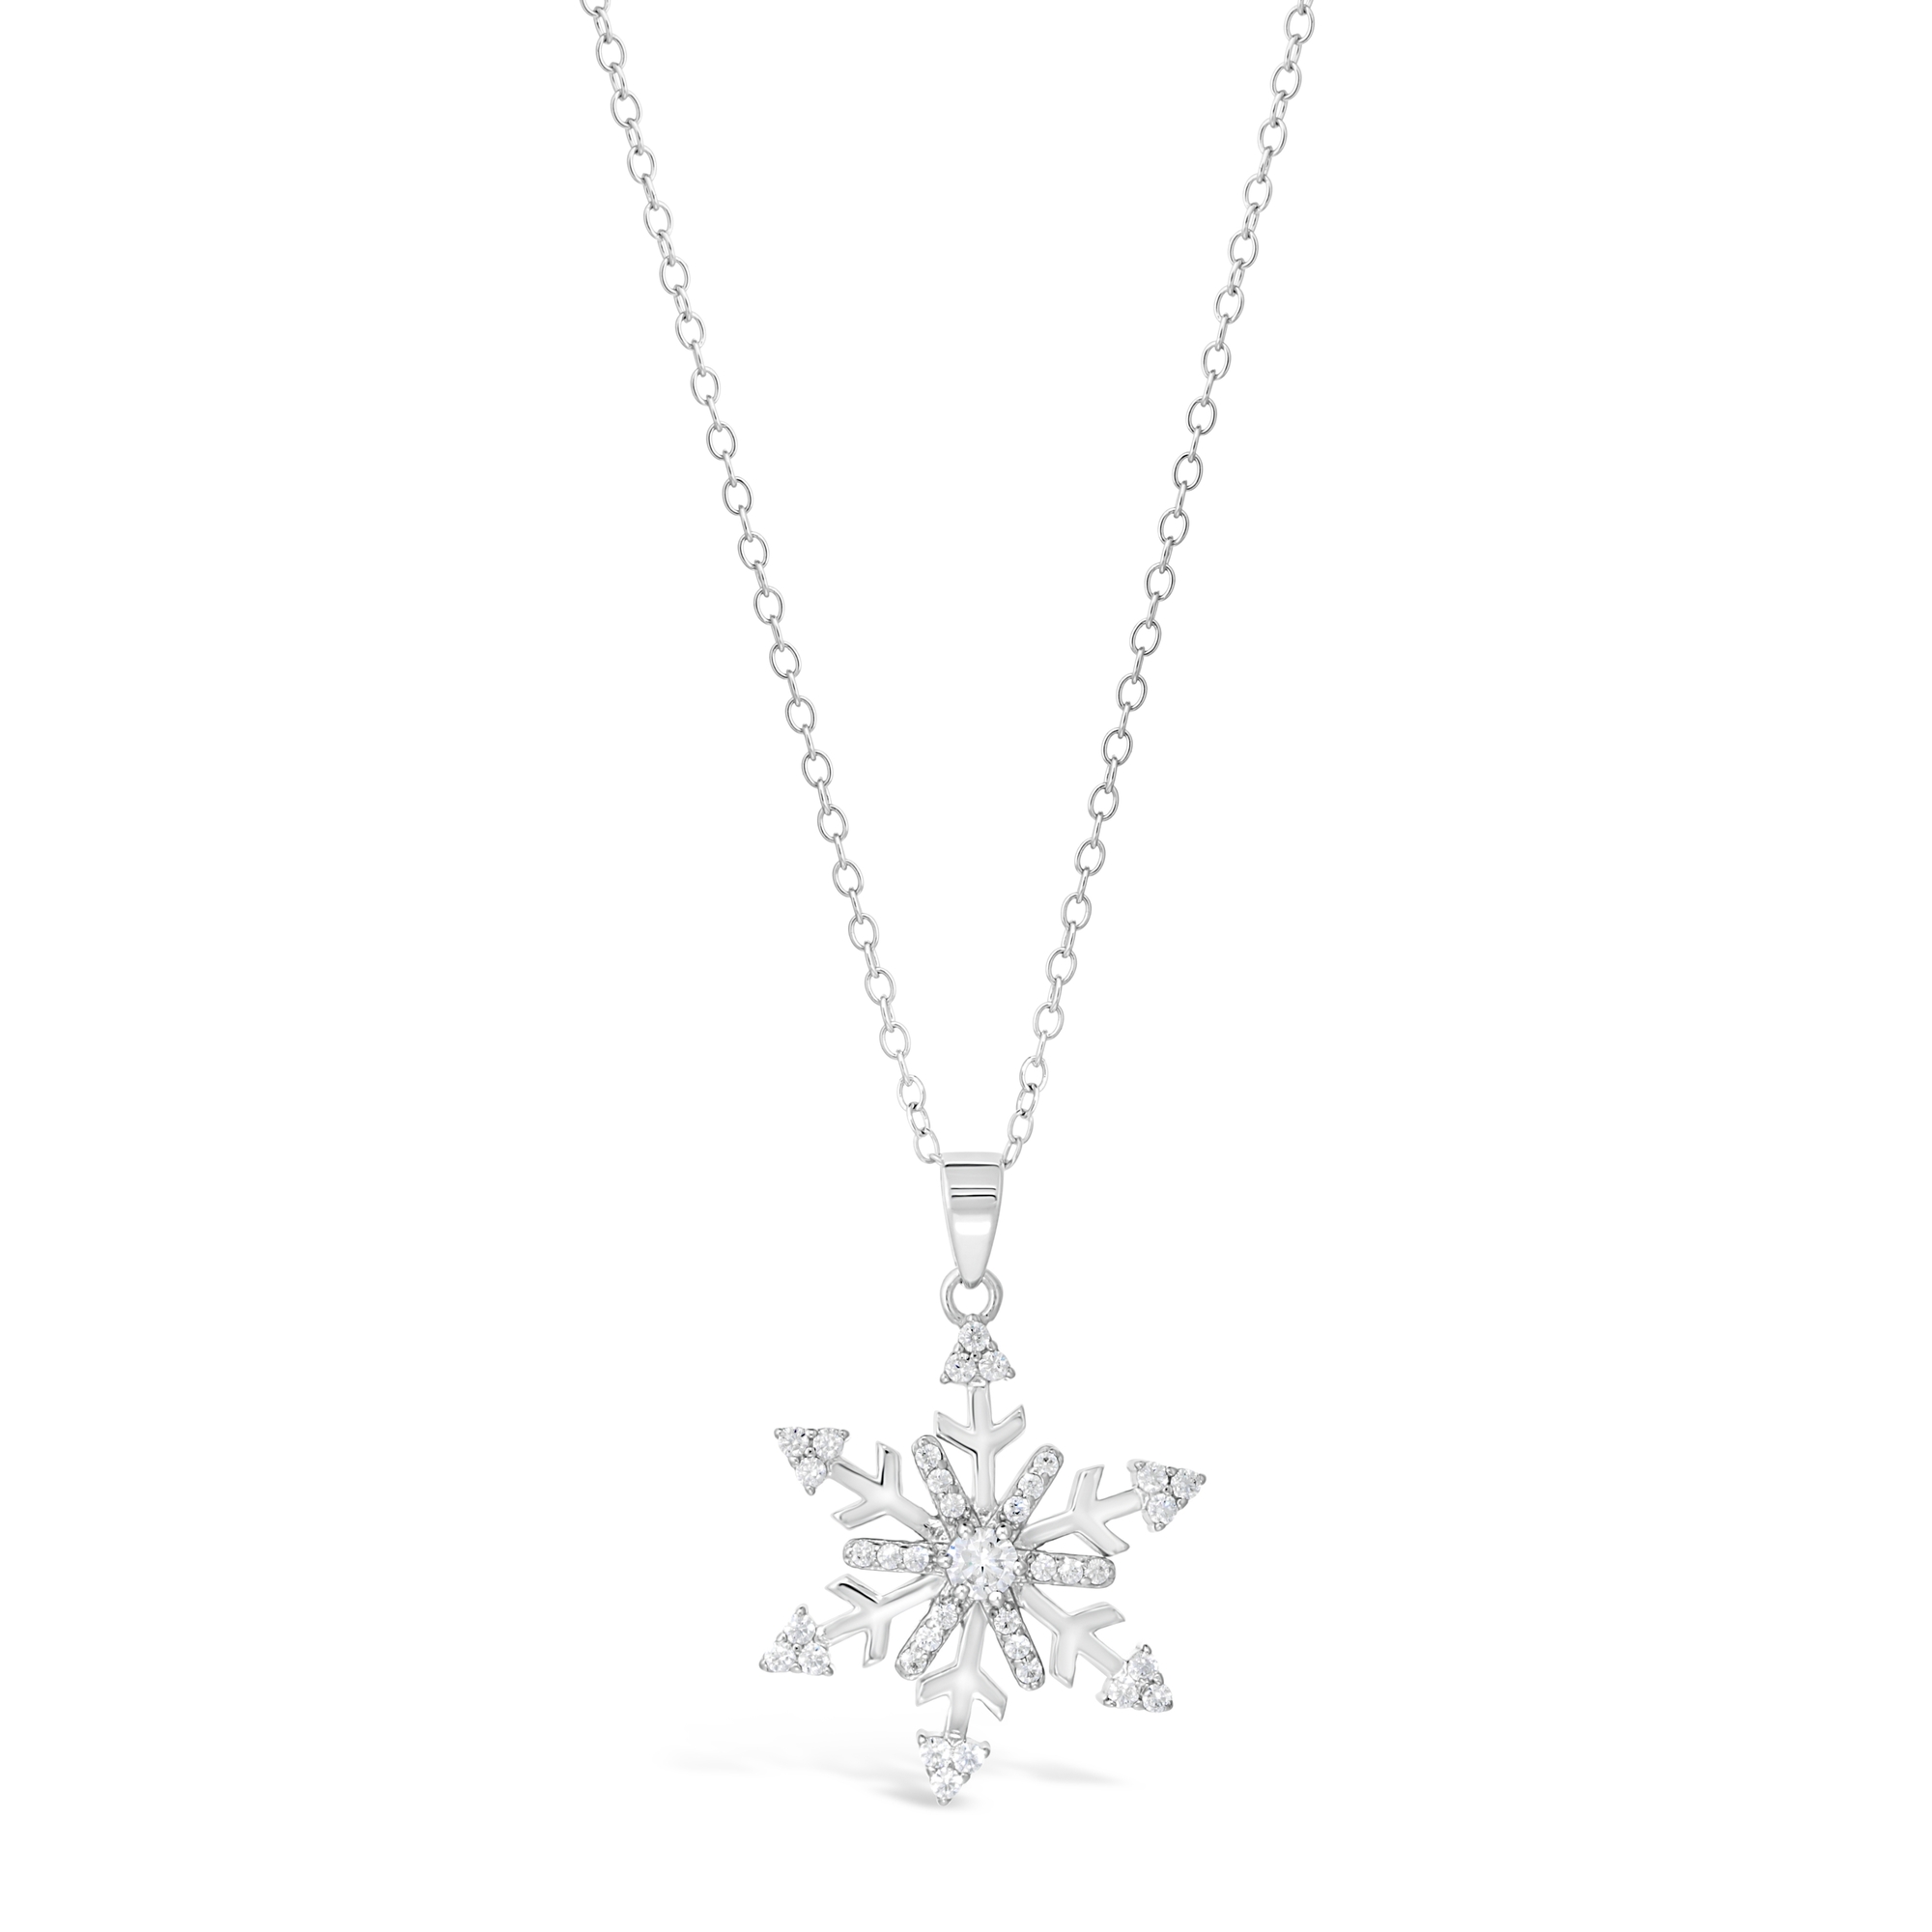 Women's Flurry Snowflake Pendant Necklace with Lobster Clasp, 925 Sterling Silver, Cubic Zirconia, 18" Chain | Lavari Jewelers